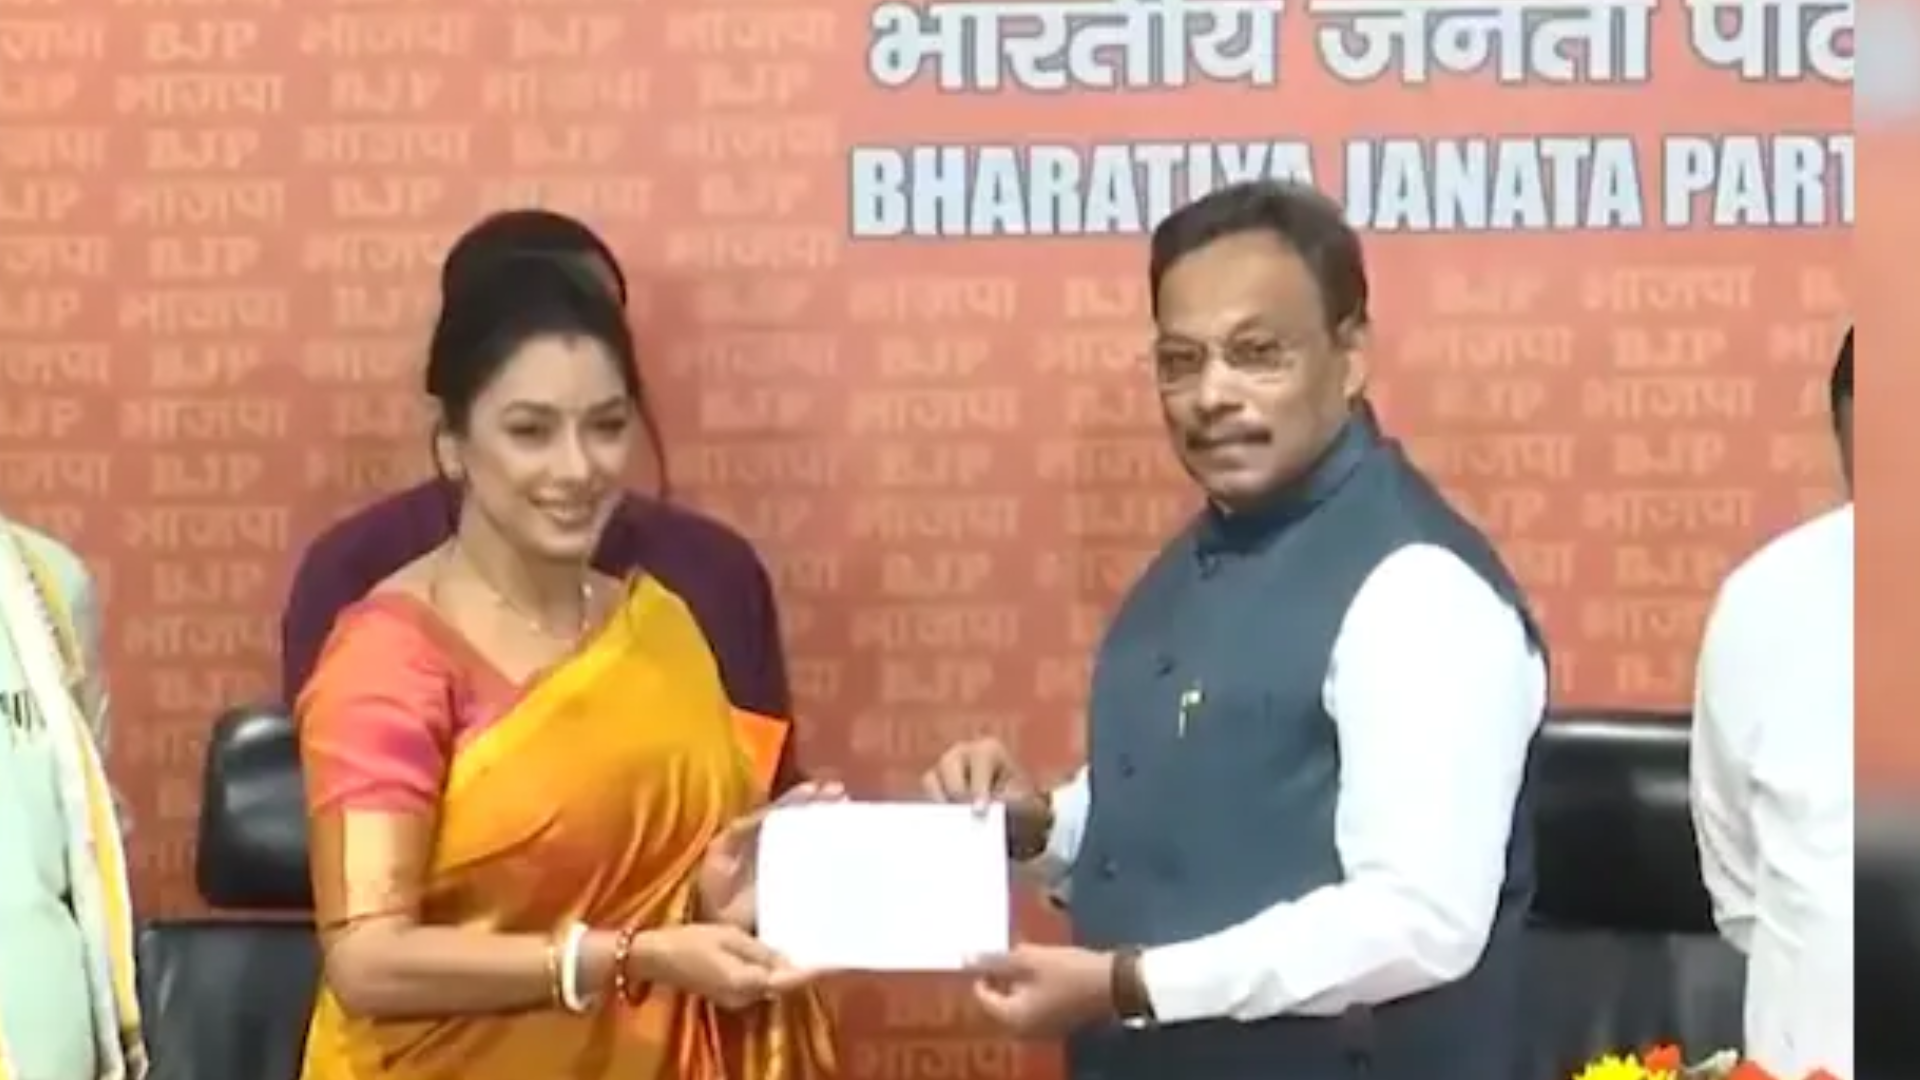 Anupamaa Star Rupali Ganguly Makes Surprise Entry into Politics, Joins BJP